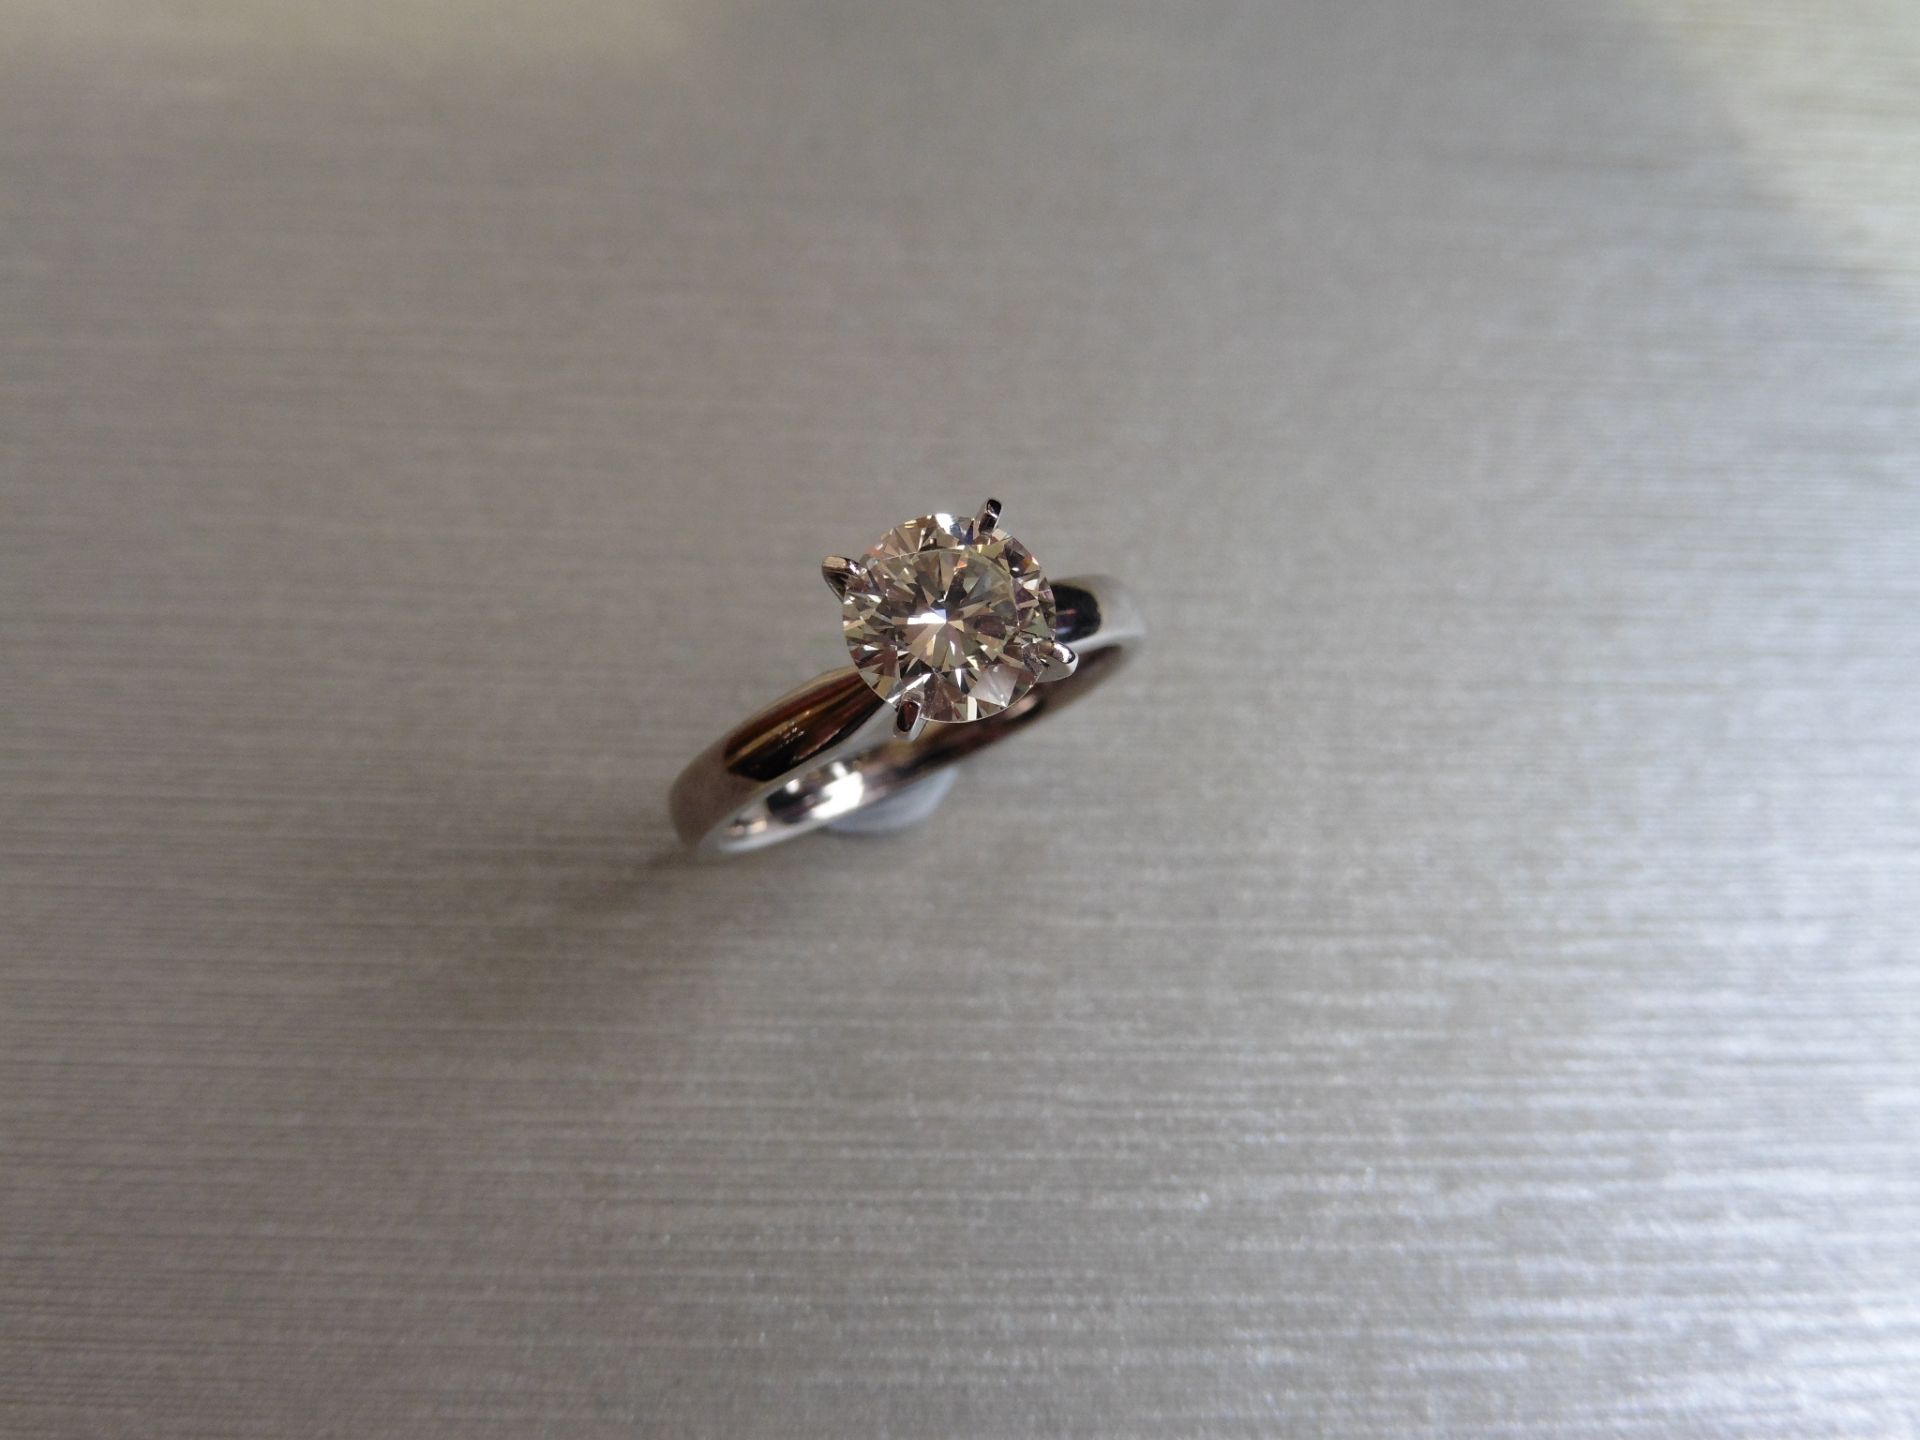 Brand new 18ct white gold diamond solitaire ring. Set with a 1.26ct brilliant cut diamond (